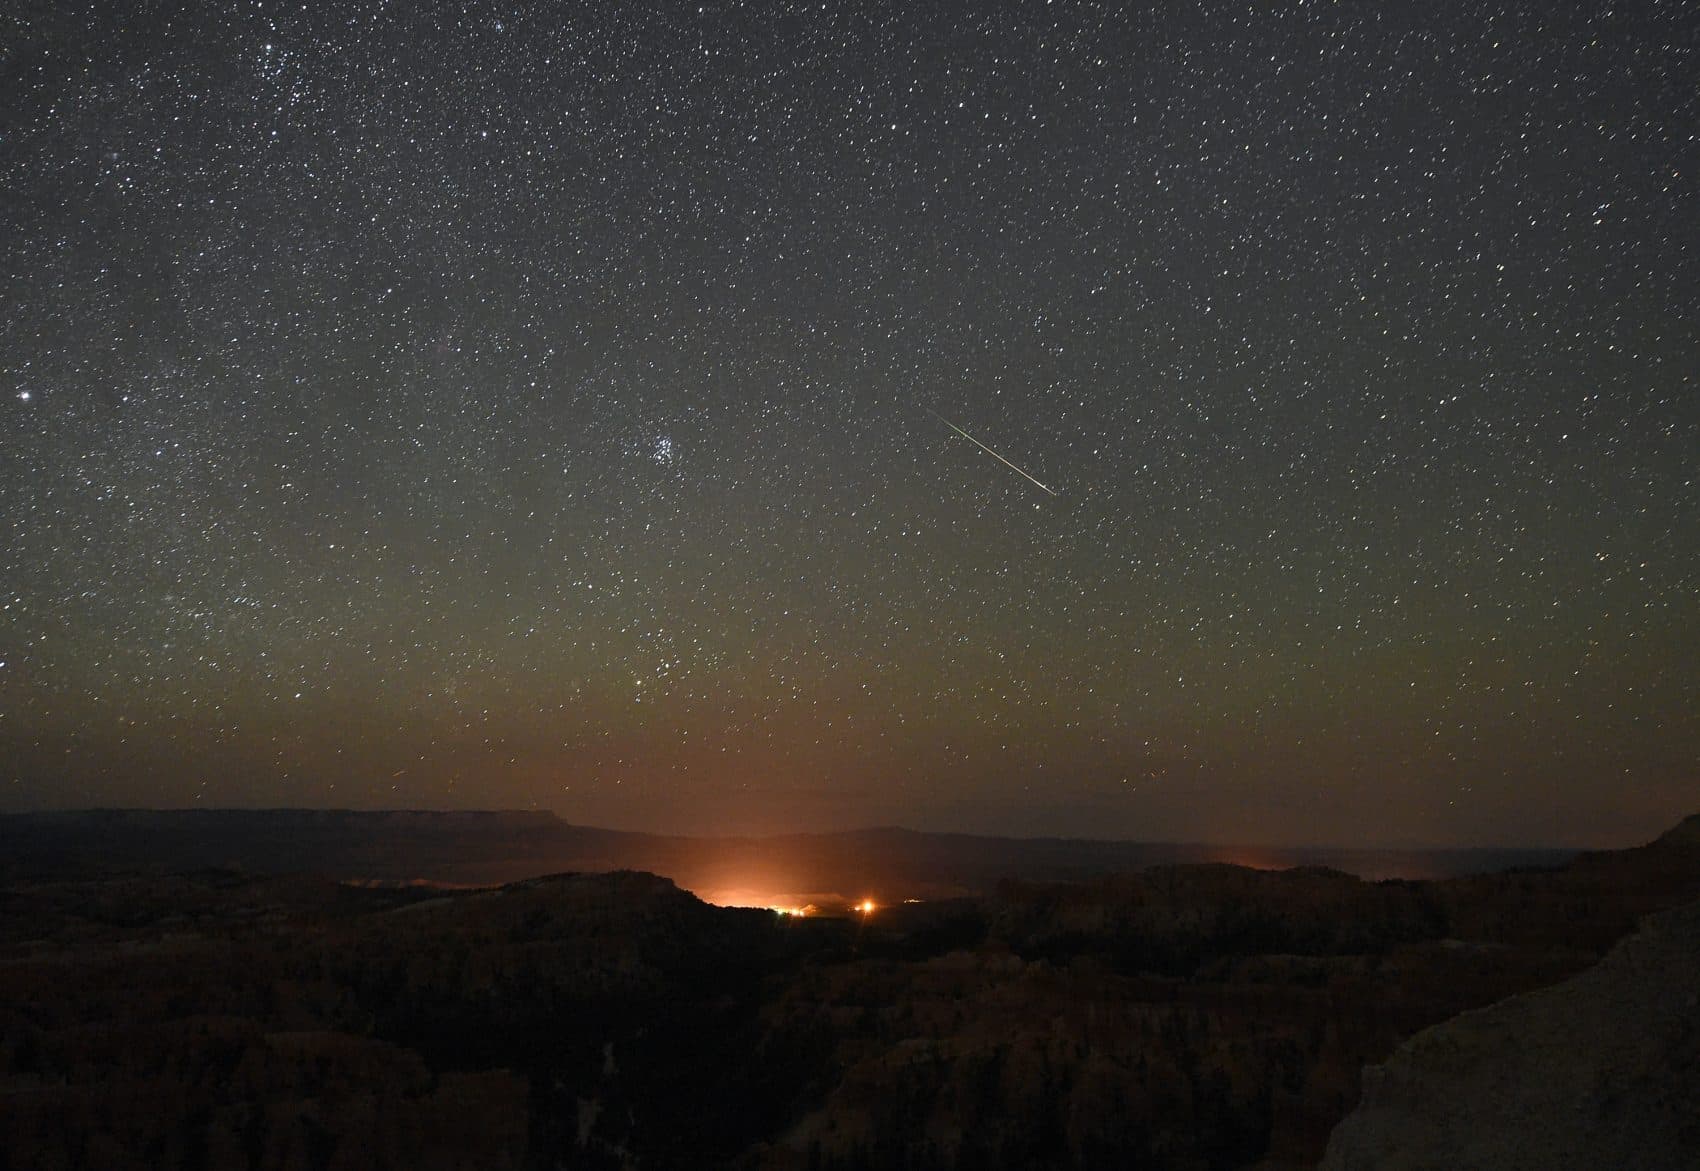 A Perseid meteor streaks across the sky above Inspiration Point early on August 12, 2016 in Bryce Canyon National Park, Utah. (Ethan Miller/Getty Images)